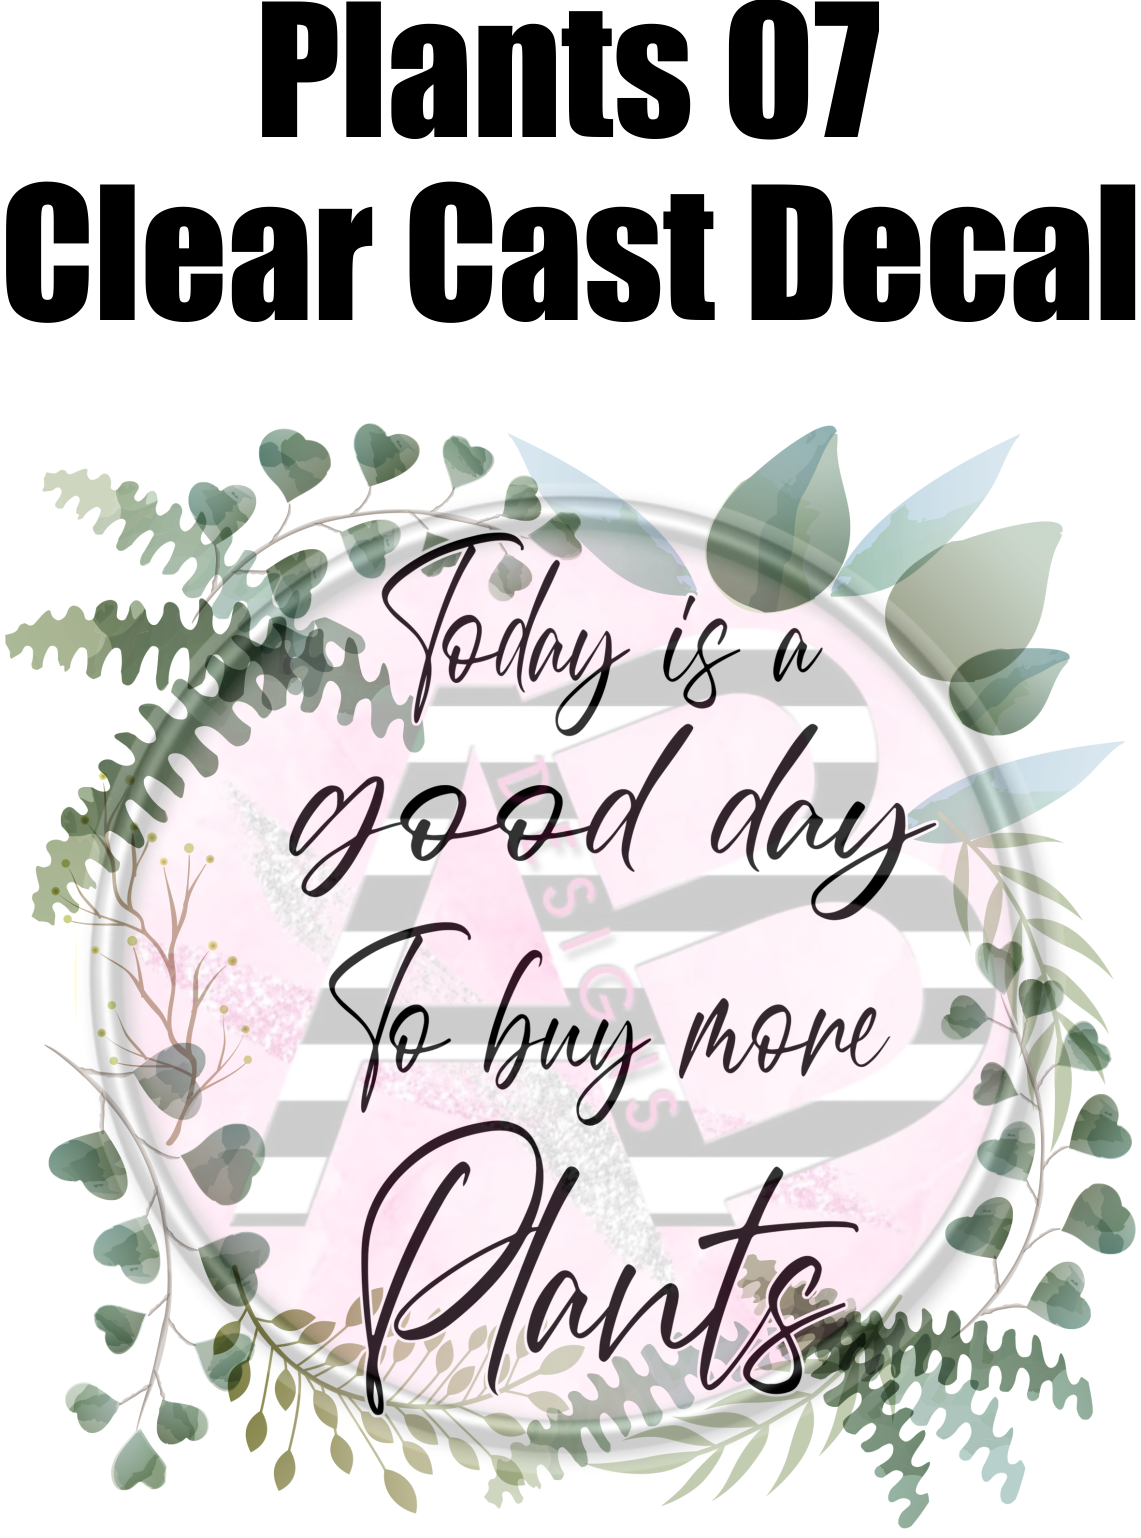 Plants 07 - Clear Cast Decal - 124